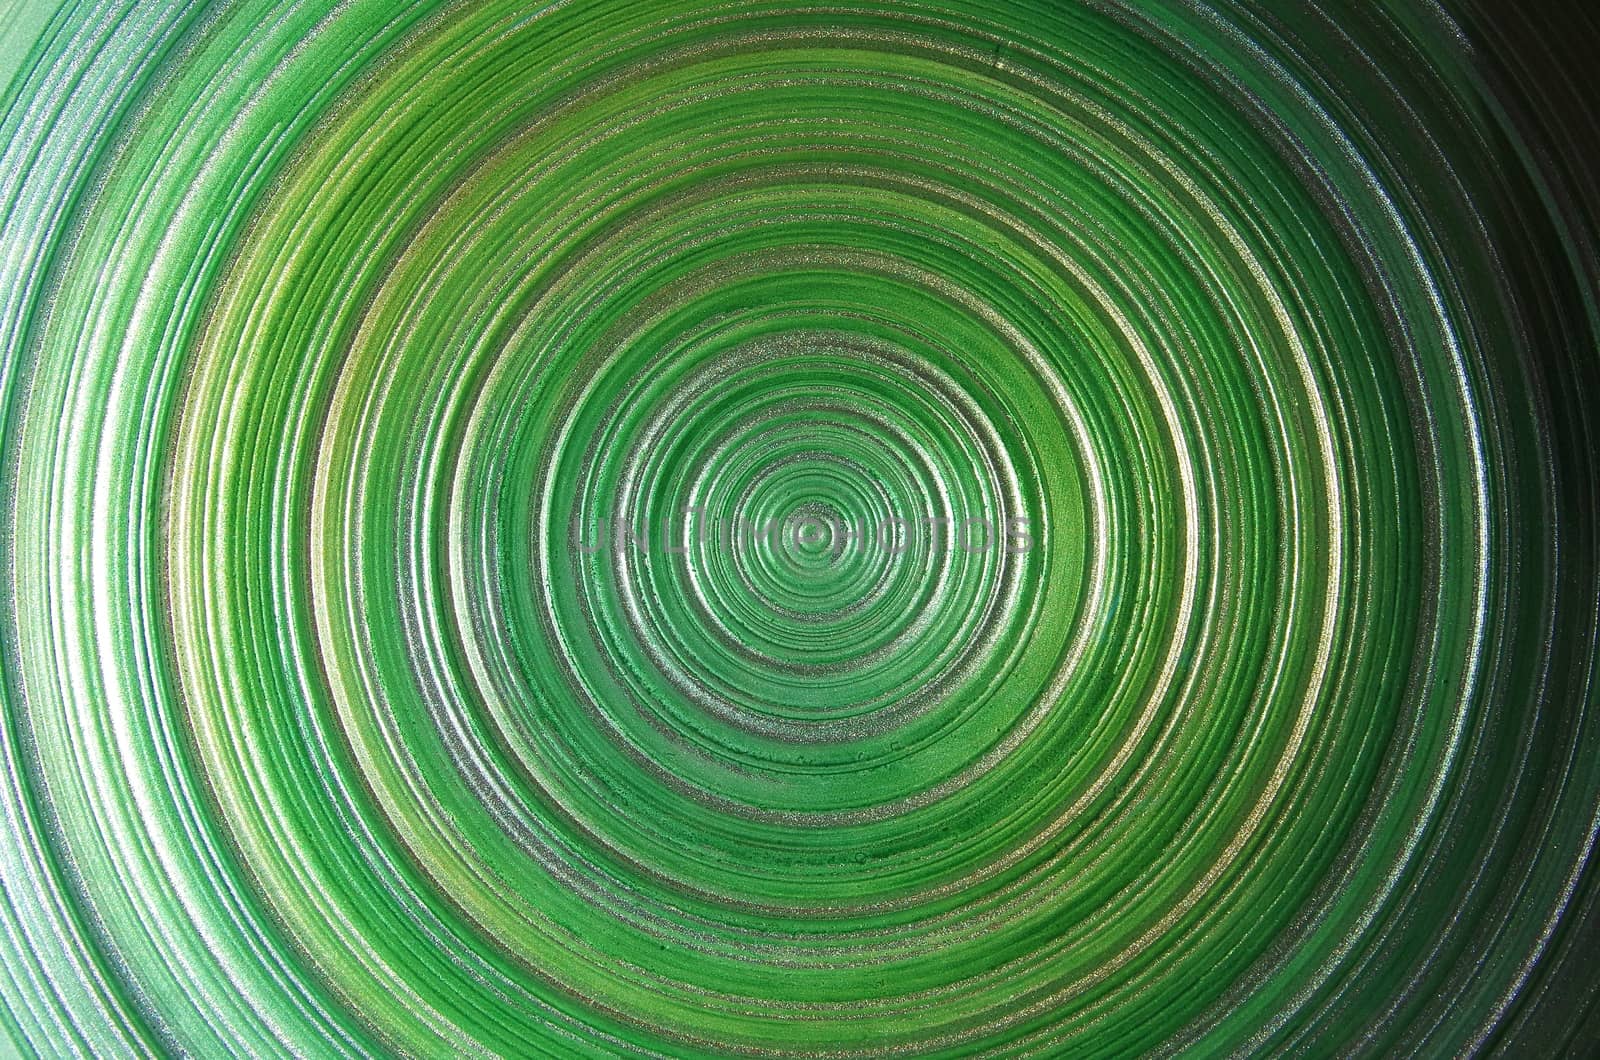 Shades of green are represented in a series of concentric circles